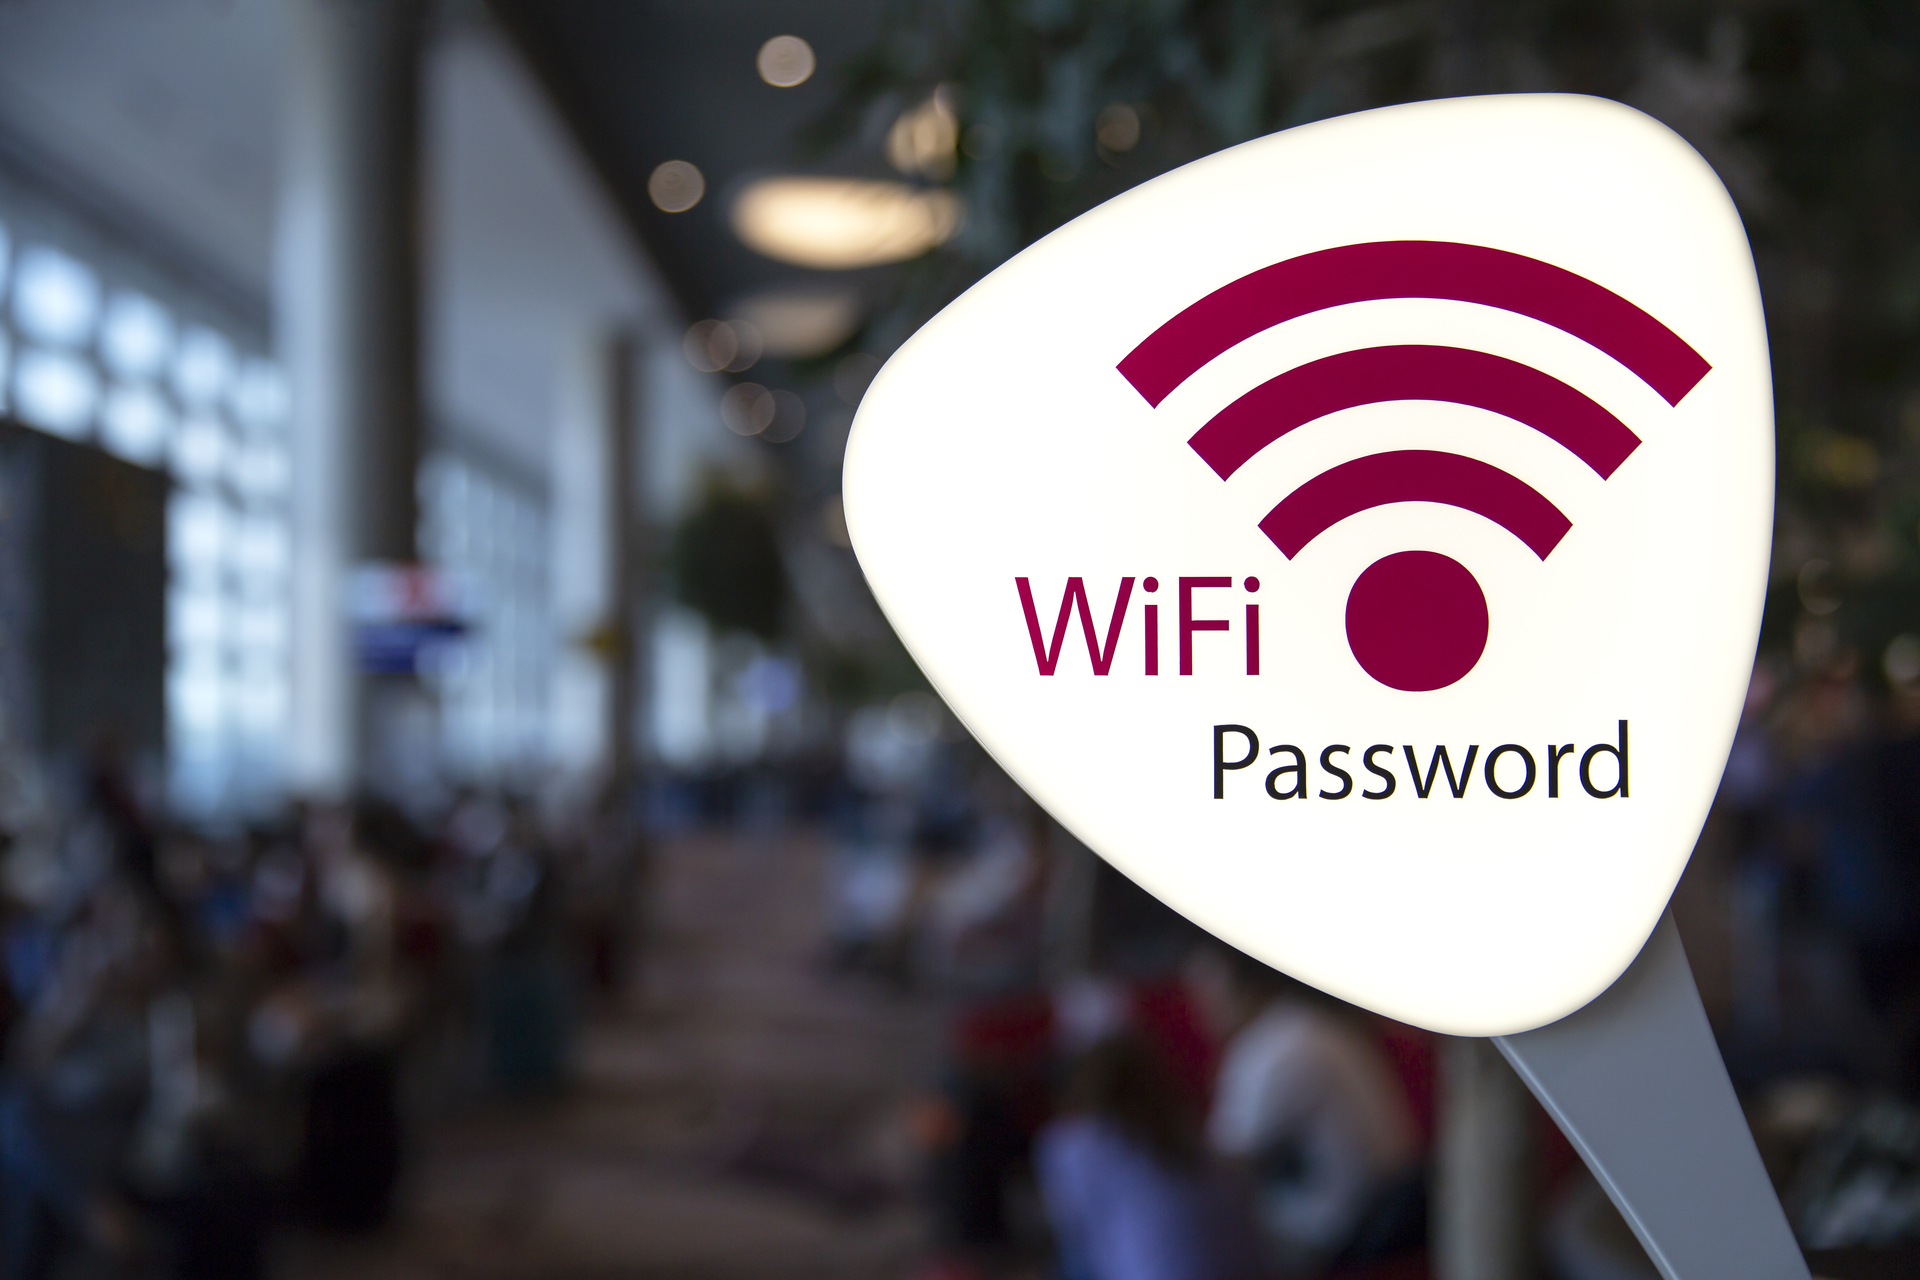 Find out how to hack WiFi password and use it for free